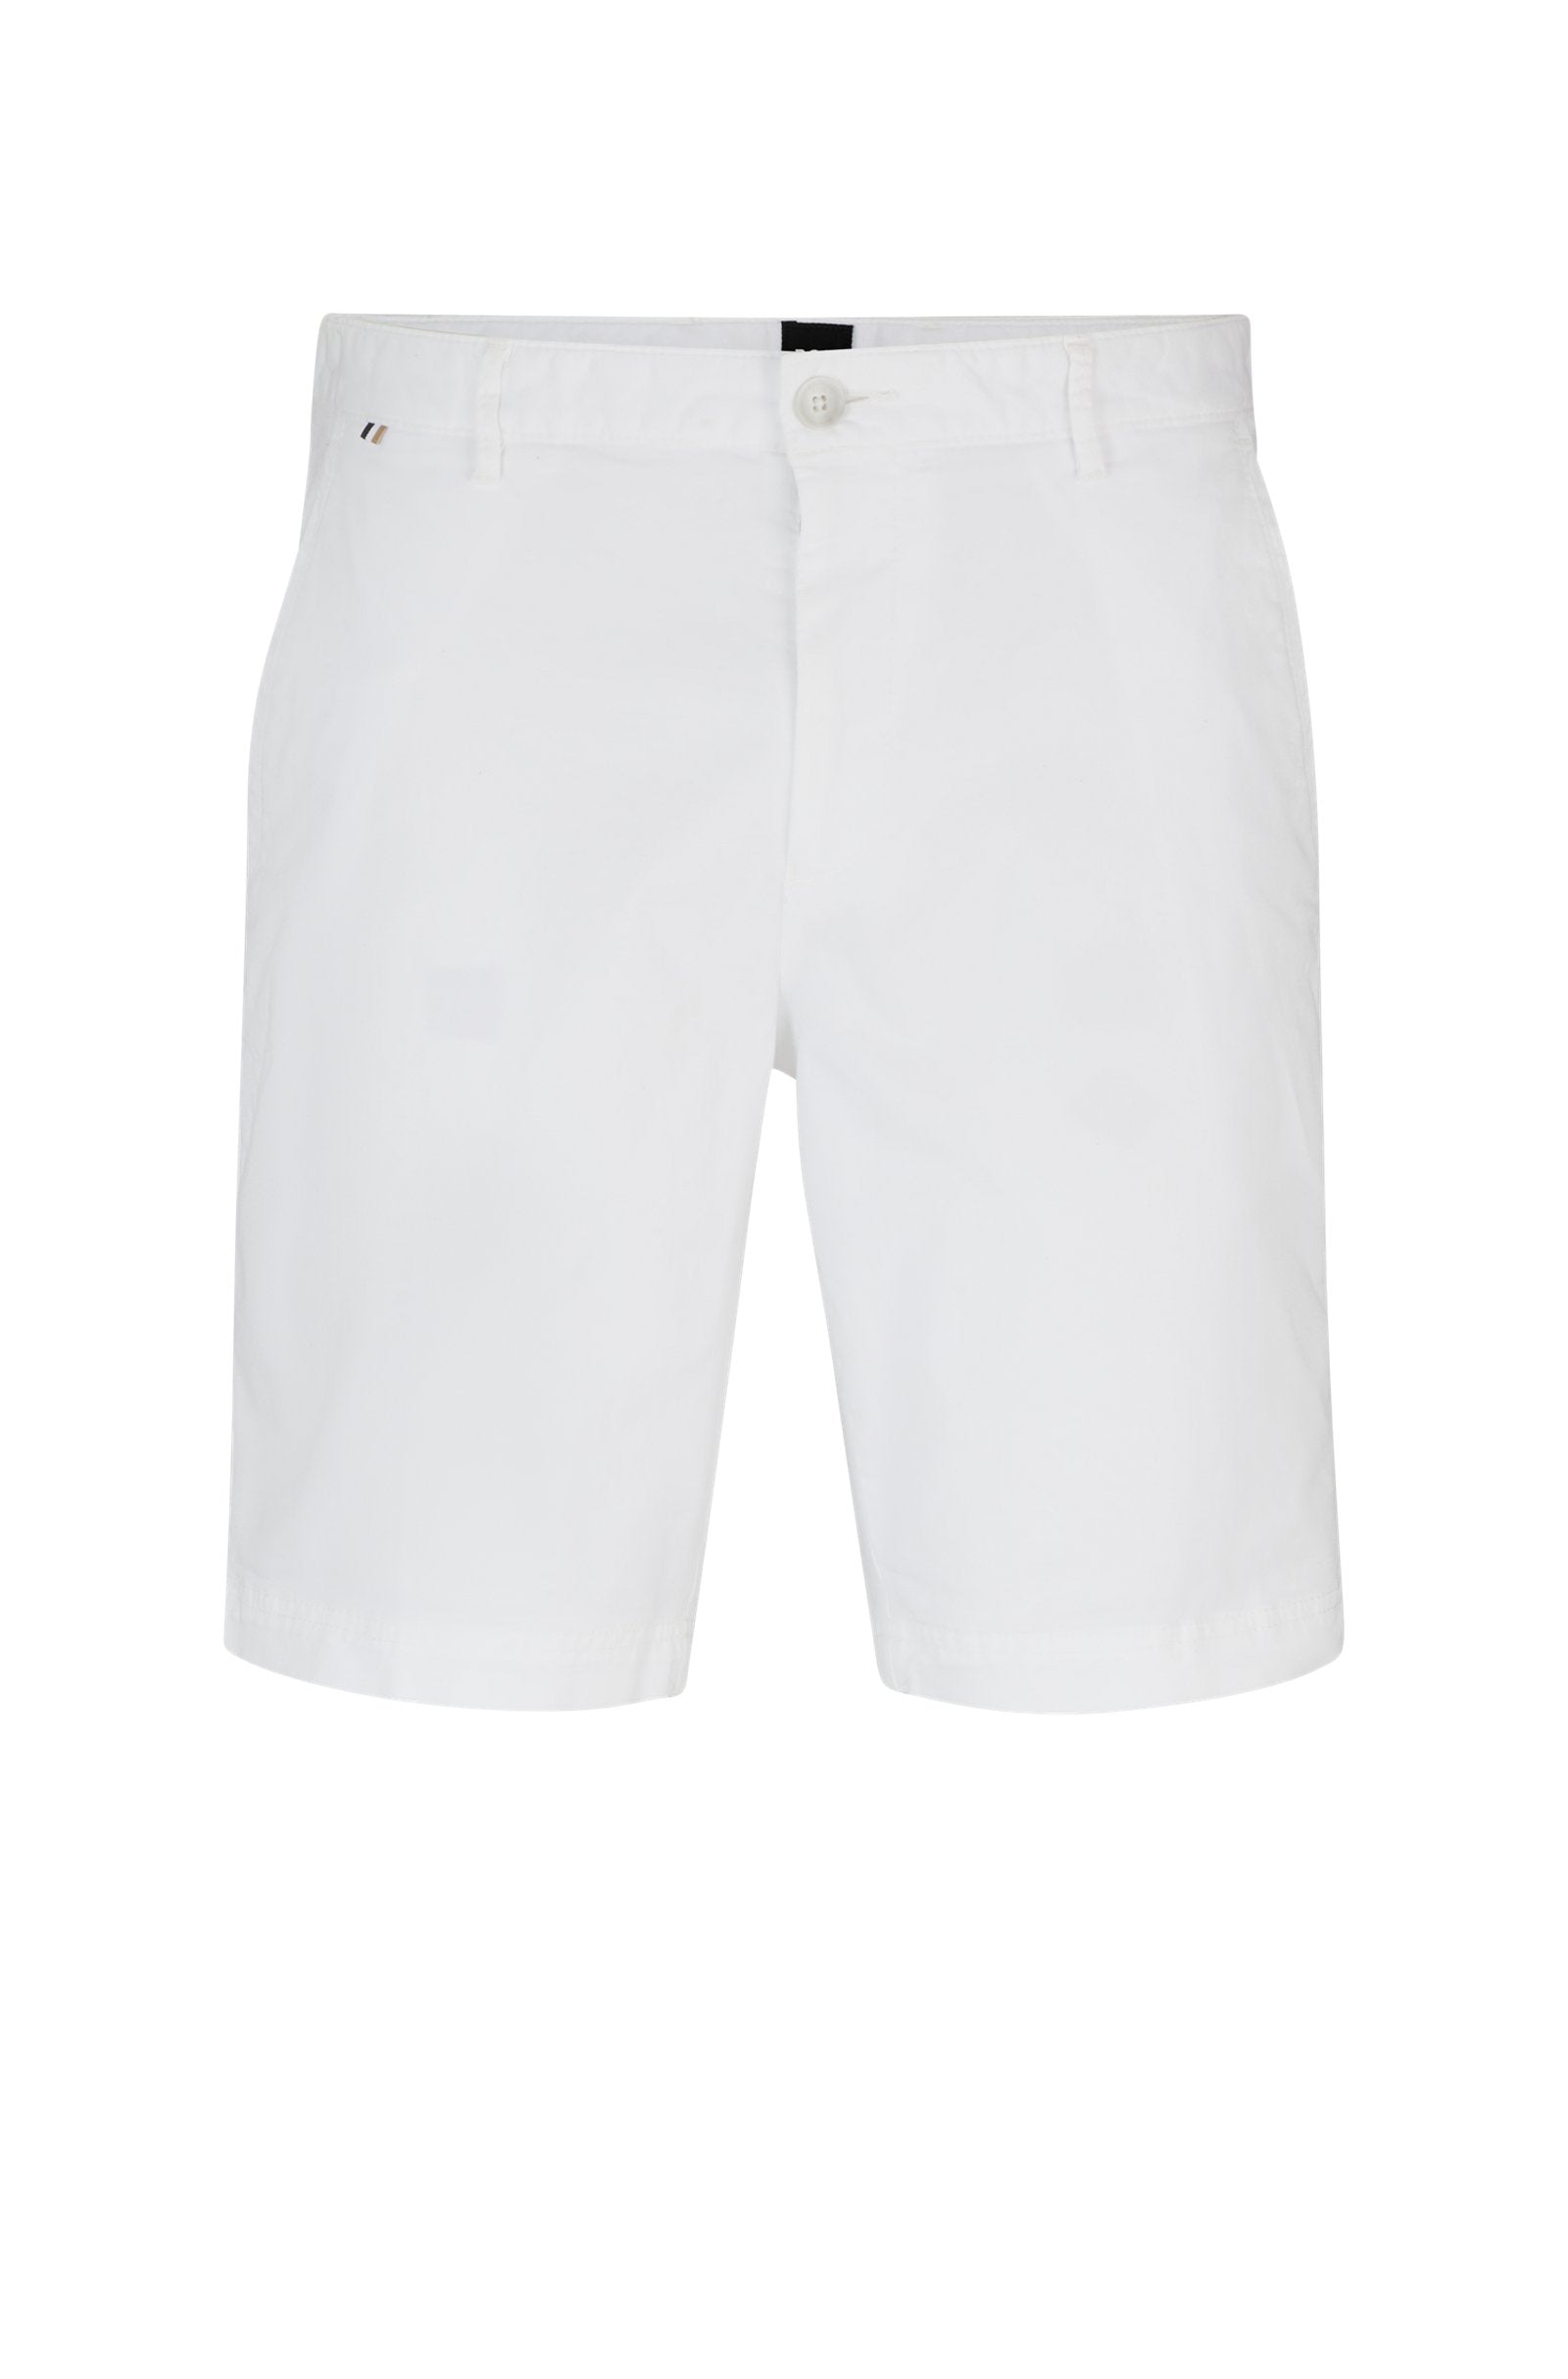 BOSS - SLICE-SHORT White Slim Fit Shorts In Stretch Cotton 50512524 100